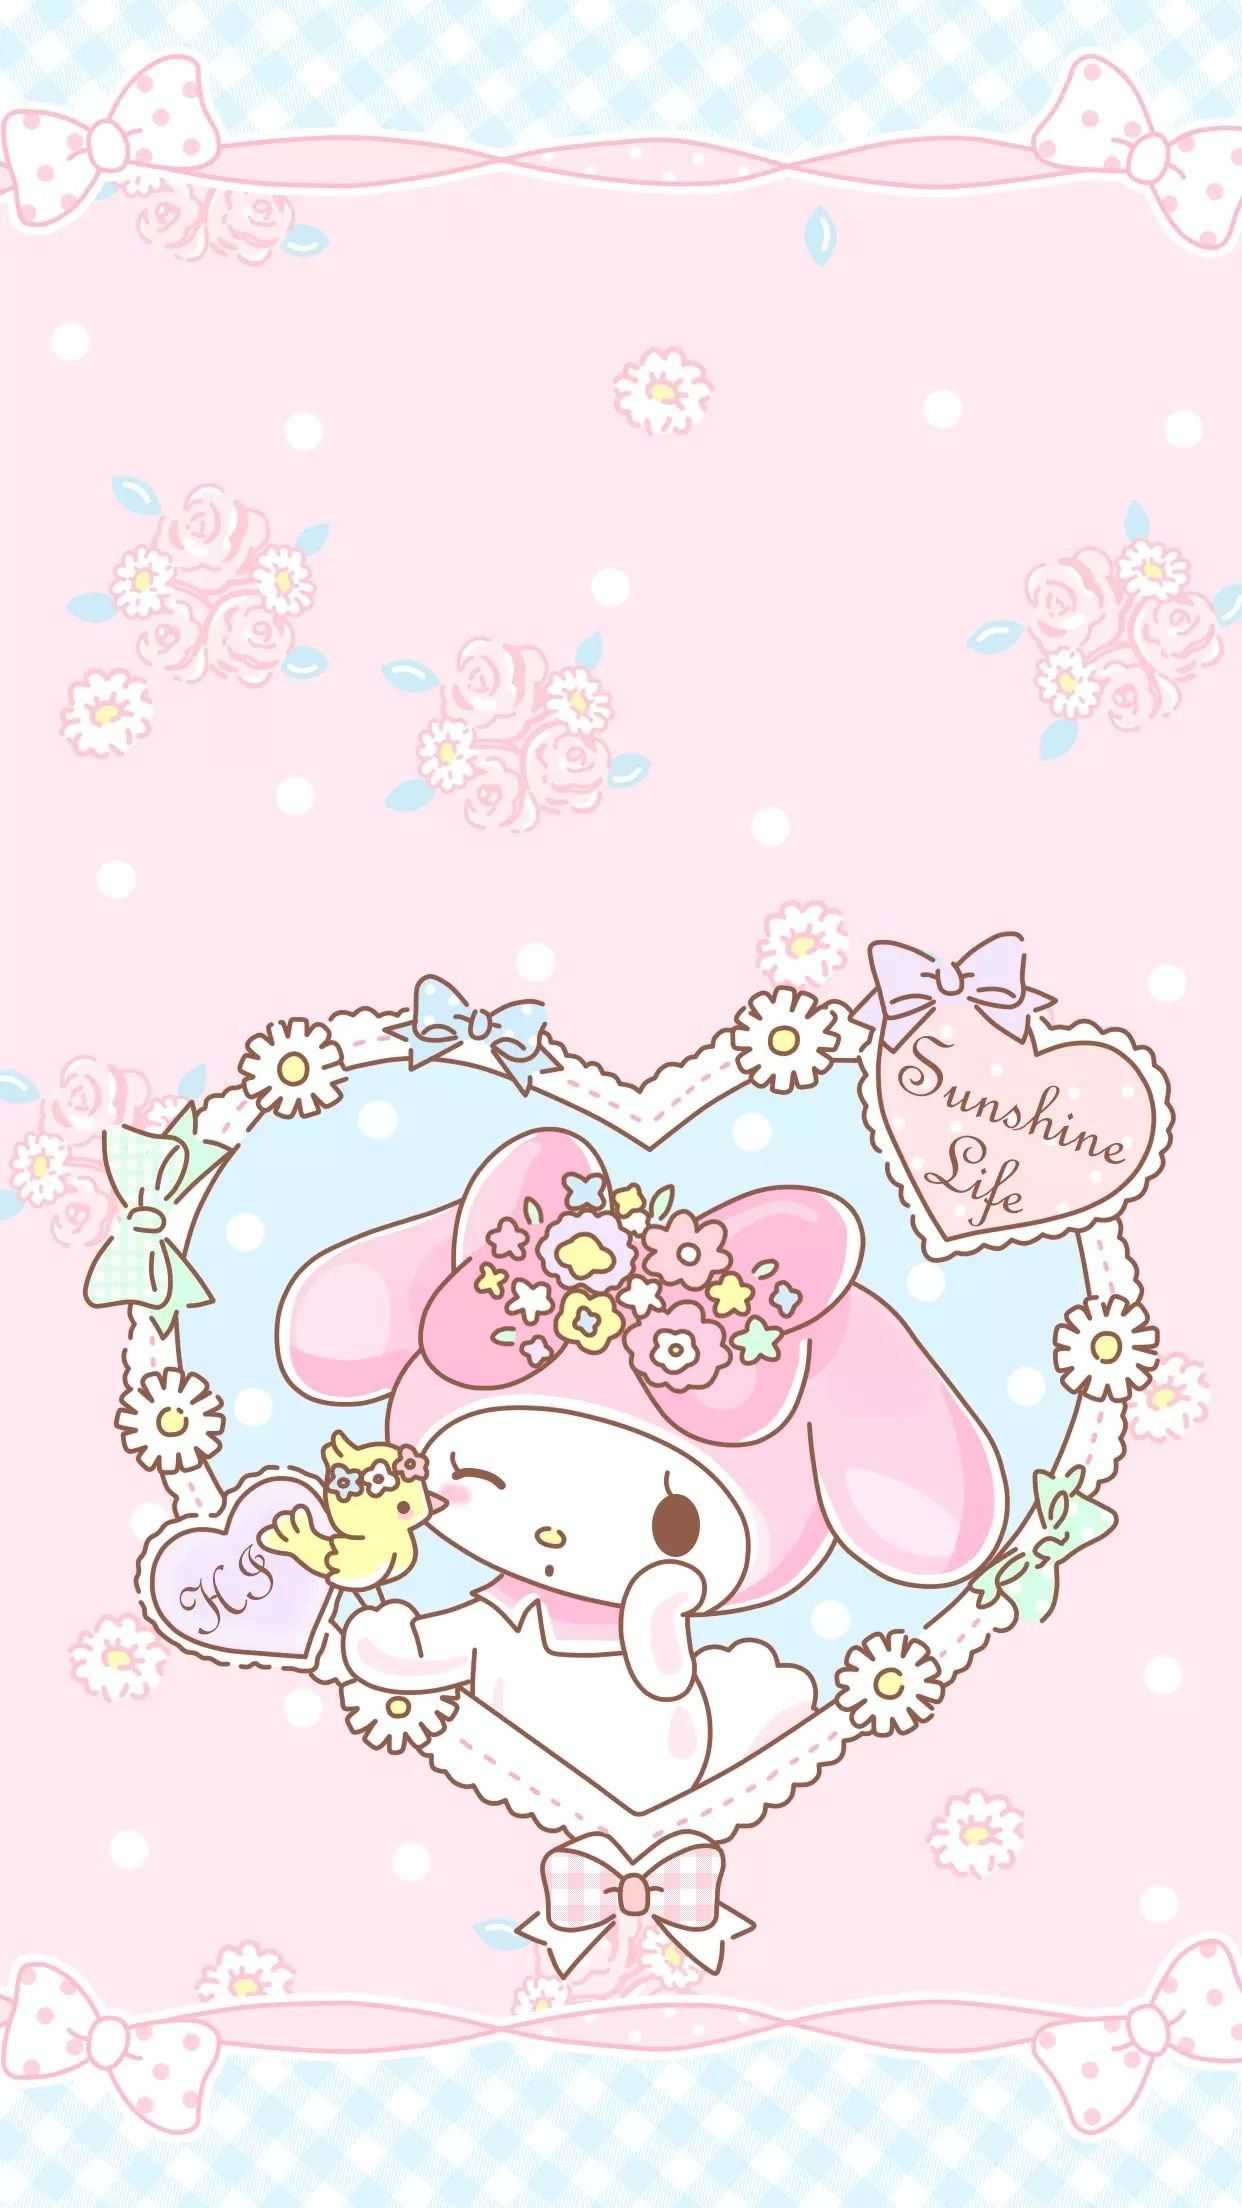 A cute pink and white cartoon character with flowers - Sanrio